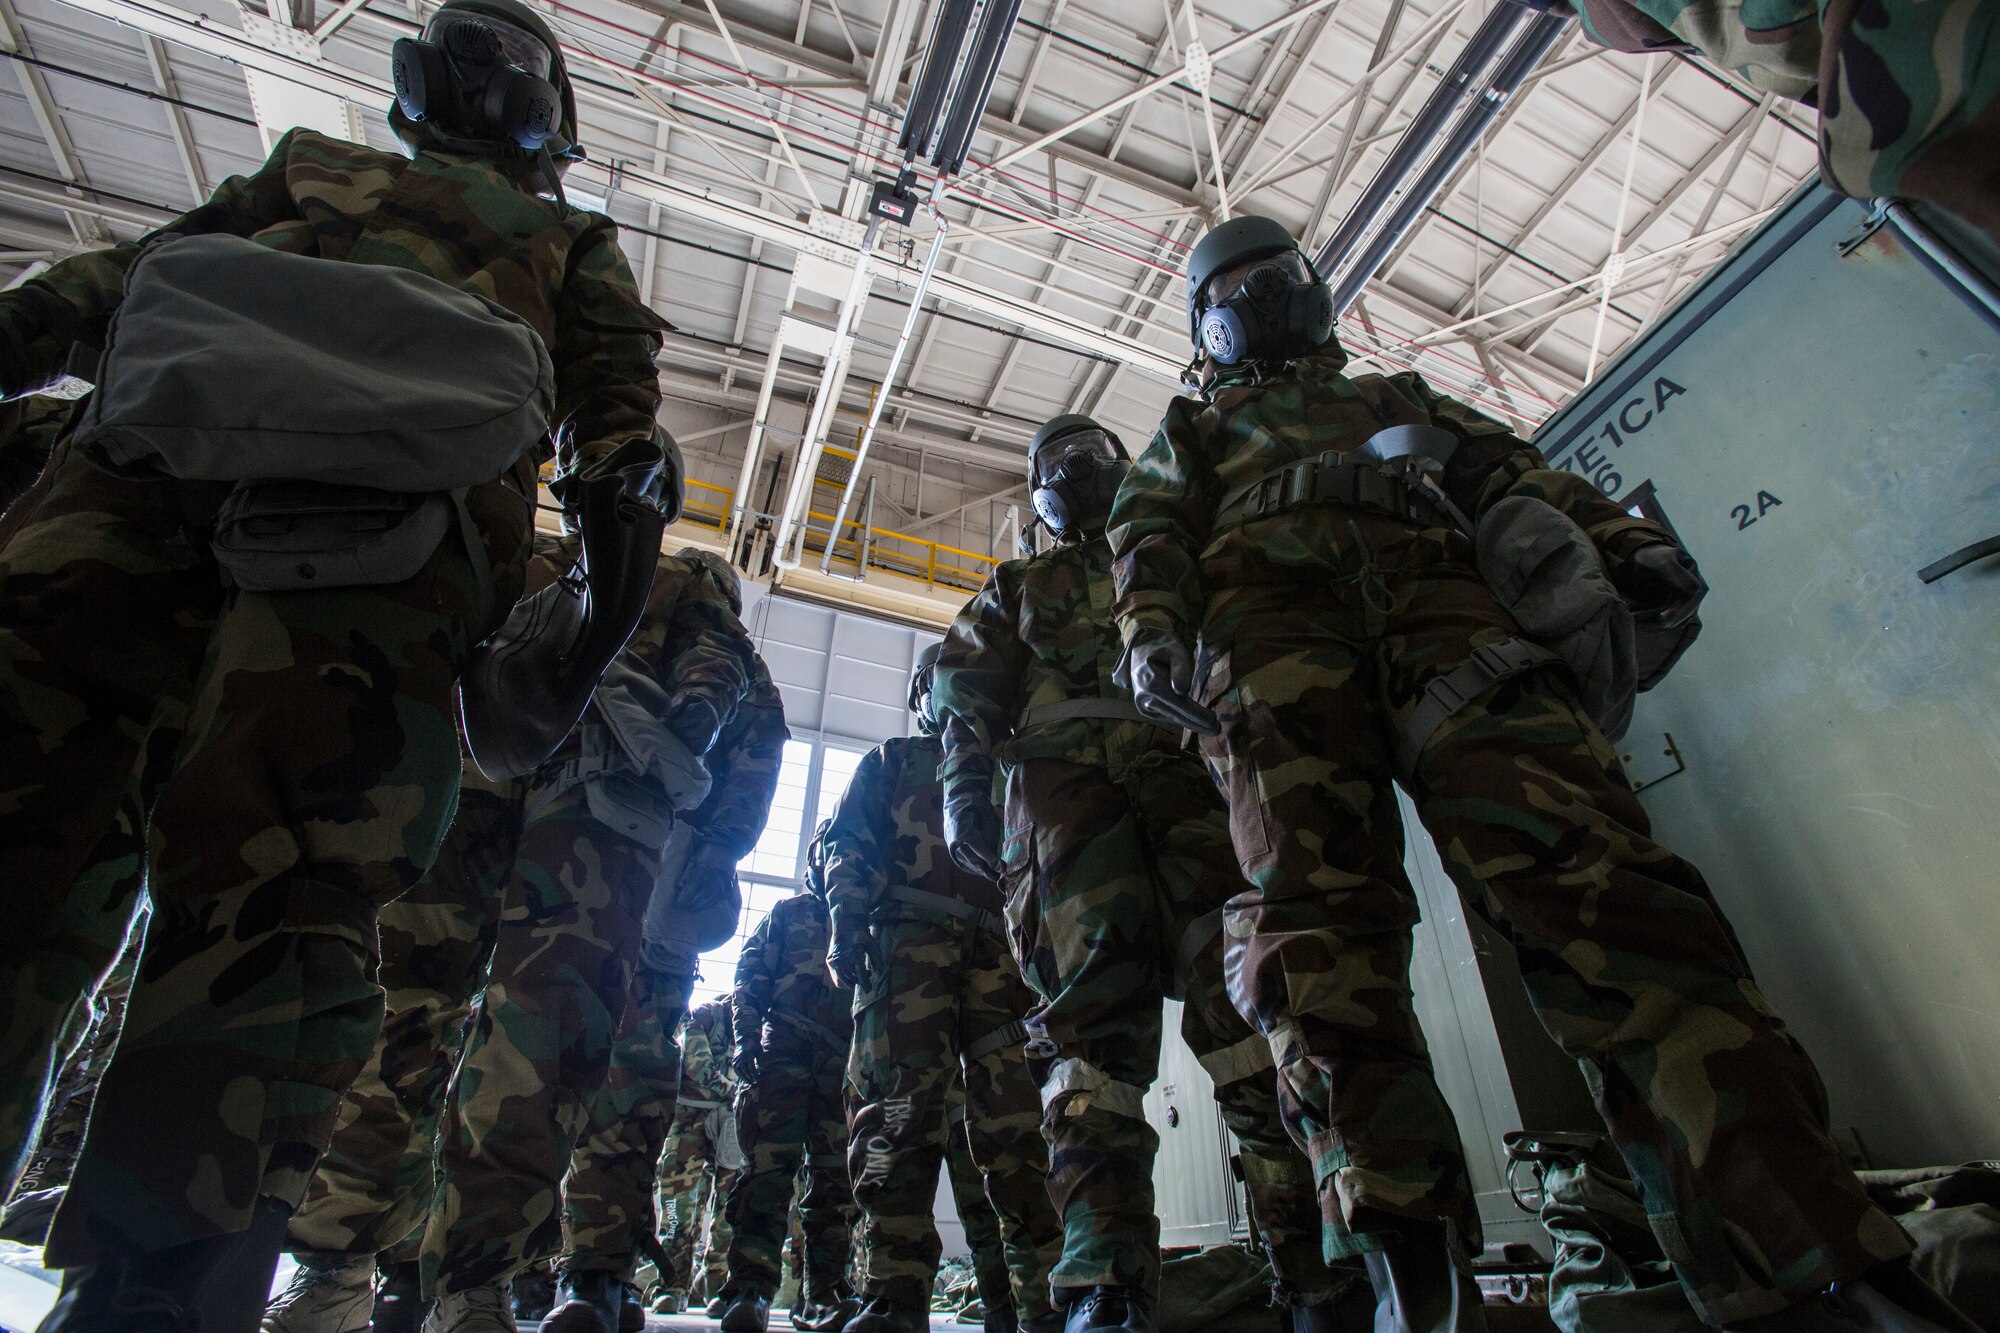 Airmen from the 108th Wing wait in line wearing their mission-oriented protective posture gear during the Wing’s Expeditionary Skills Rodeo at Joint Base McGuire-Dix-Lakehurst, N.J., March 7, 2015. In addition, they trained on their ability to survive and operate in a chemical, biological, radiological and nuclear environment. These skills make up the foundation necessary for all Airmen to function effectively in hostile environments. (U.S. Air National Guard photo by Master Sgt. Mark C. Olsen/Released)